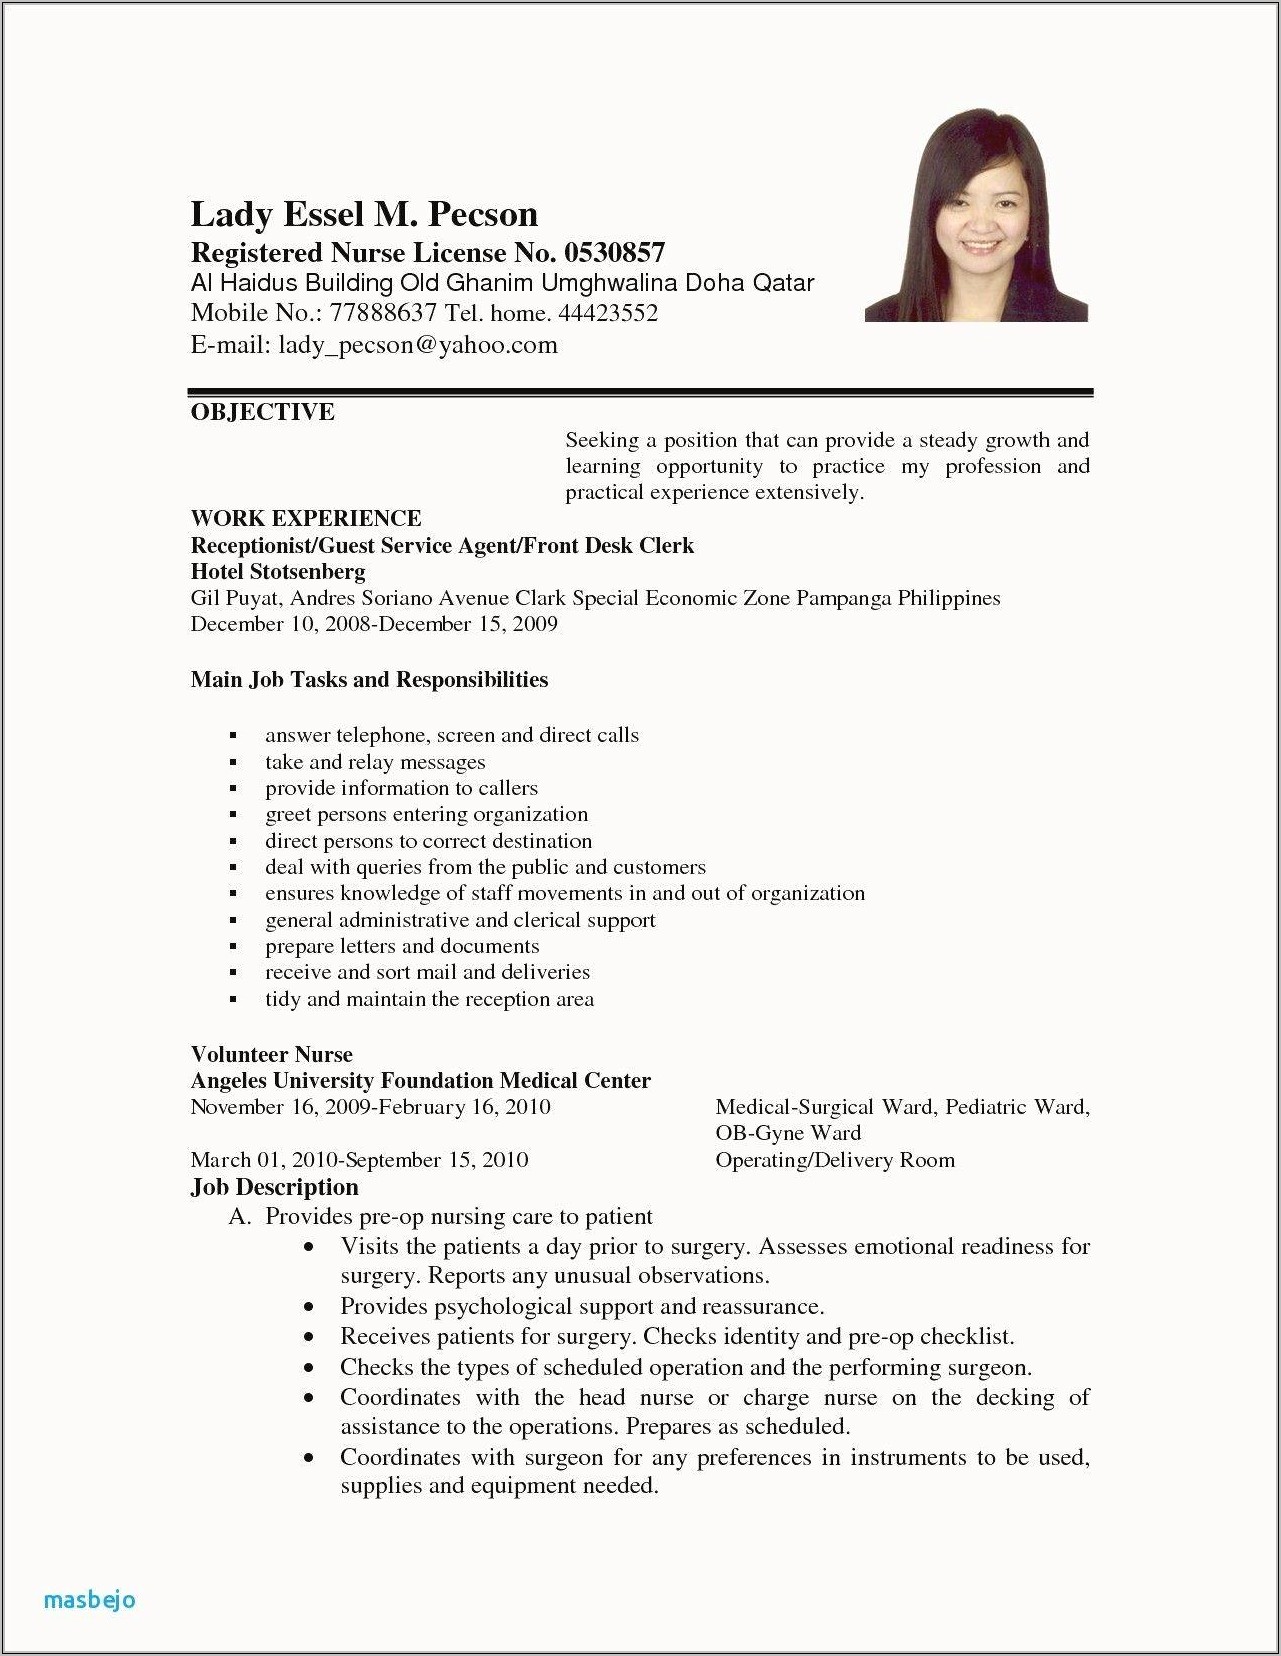 Resume Objective For Direct Support Professional